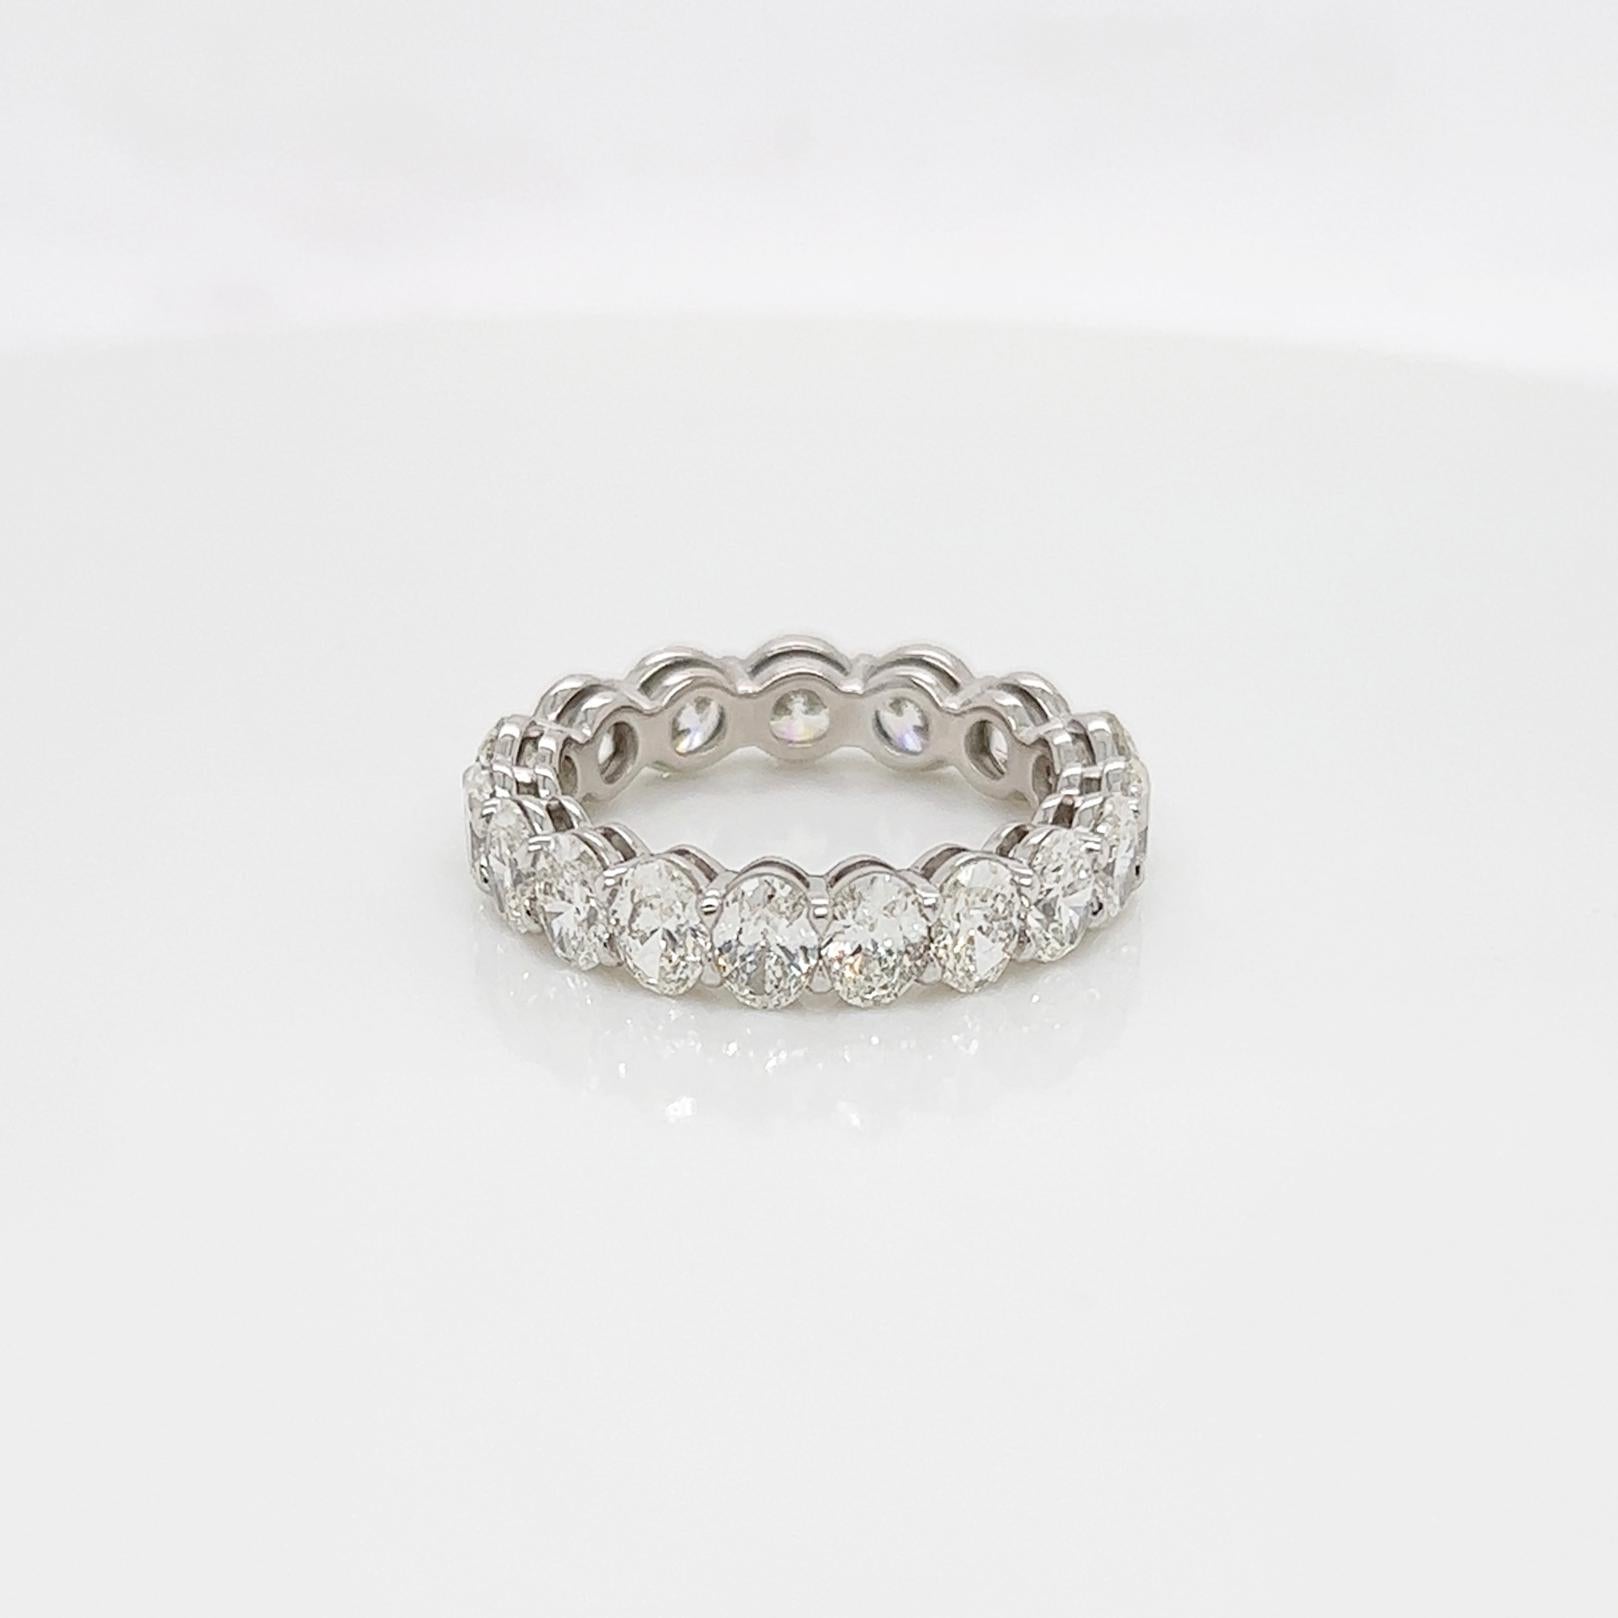 Ladies diamond mixed shape Eternity band carries 4.38ct of oval and round diamonds placed in platinum.

Size: 6.0
Color: F-G
Clarity: VS

This shared prong style Eternity band was handmade by our jewelers in New York City.